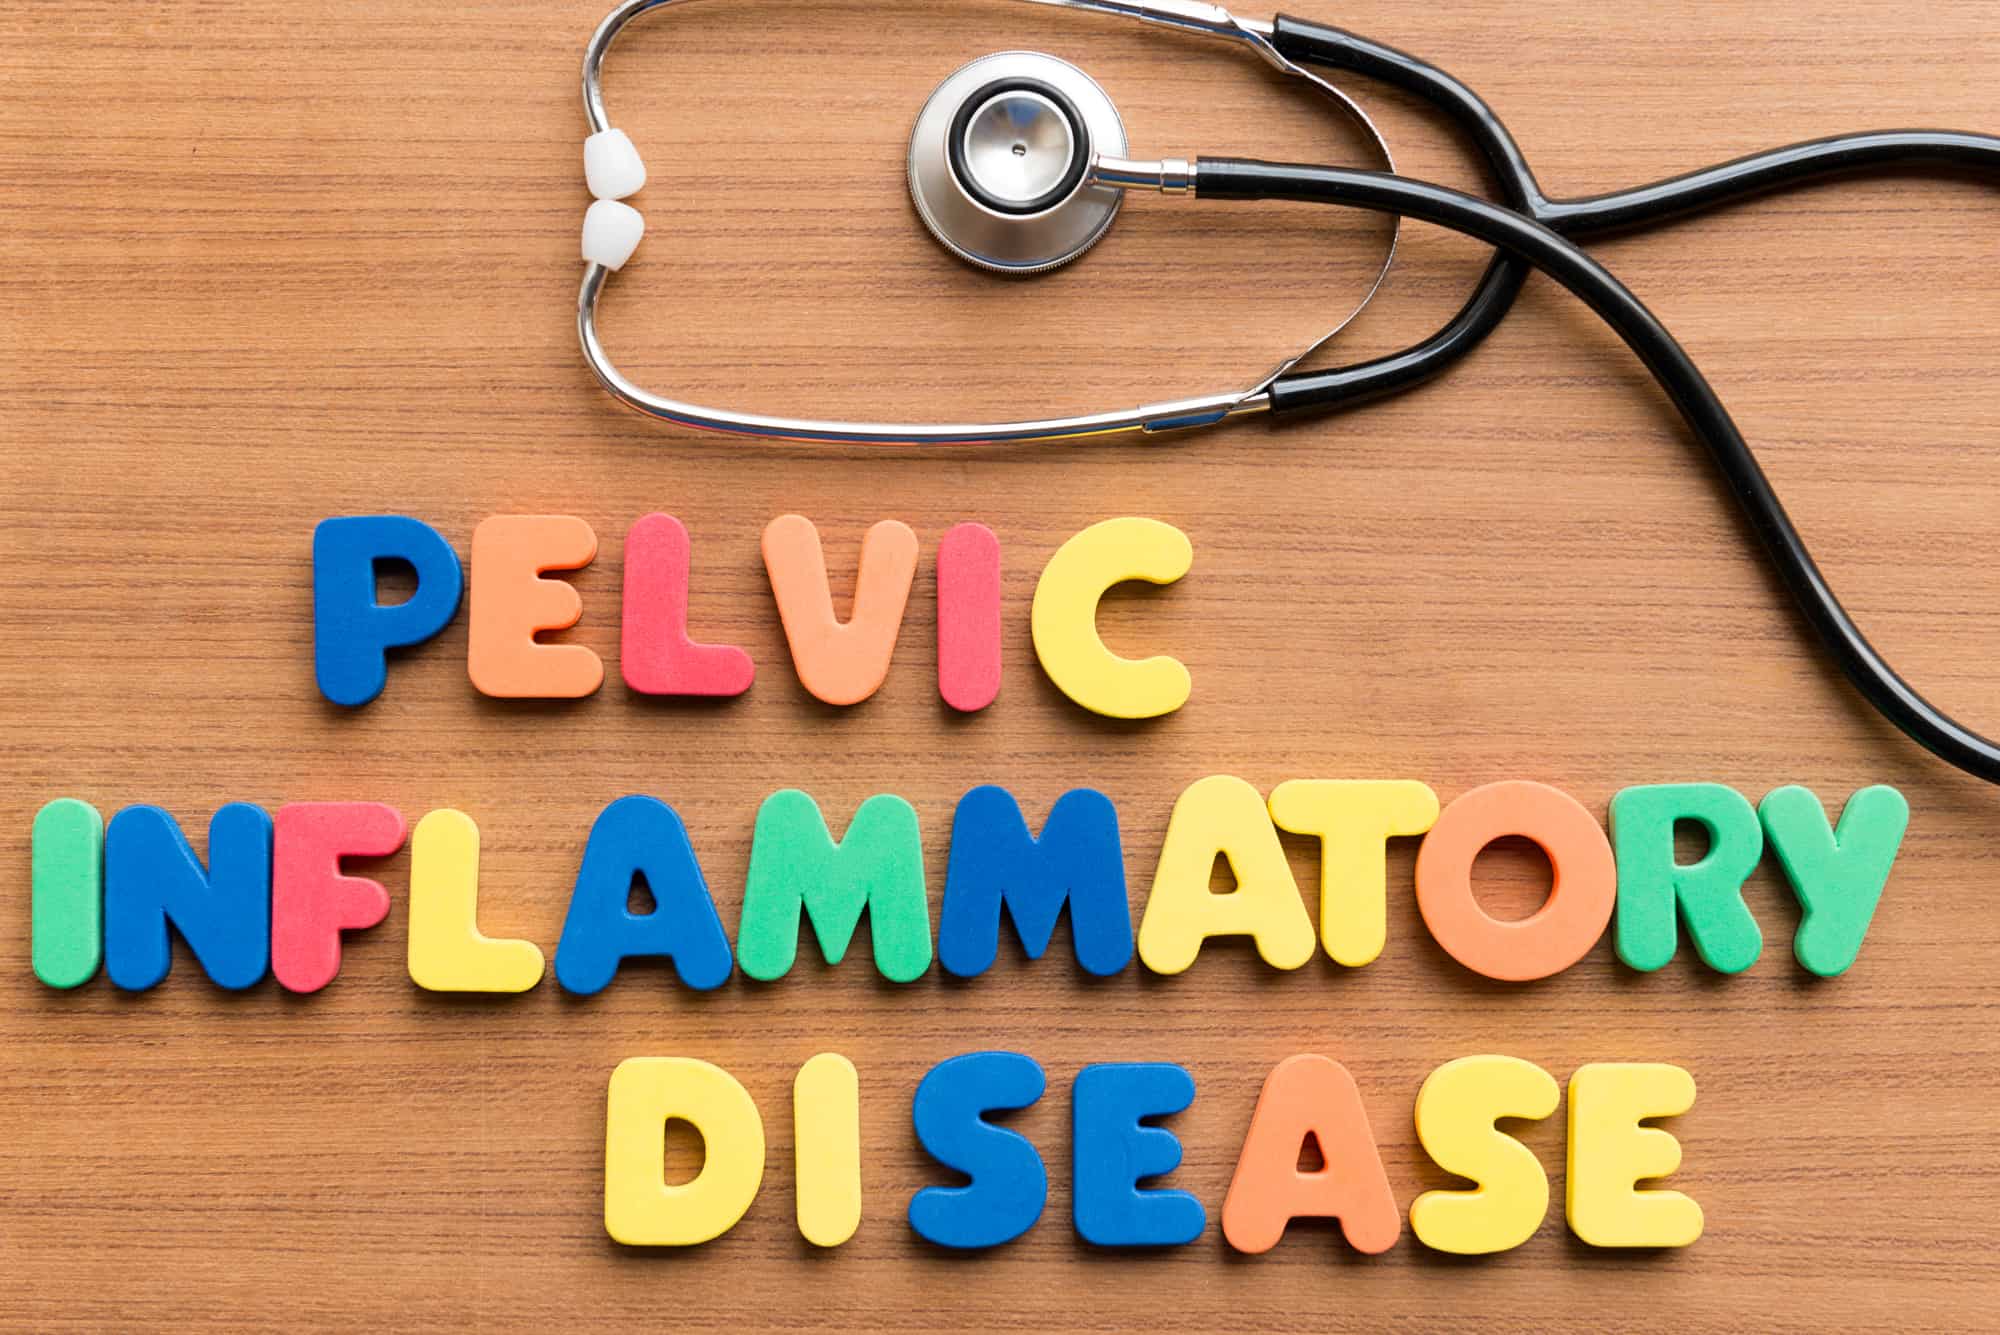 What Are The Symptoms Of Pelvic Inflammatory Disease?